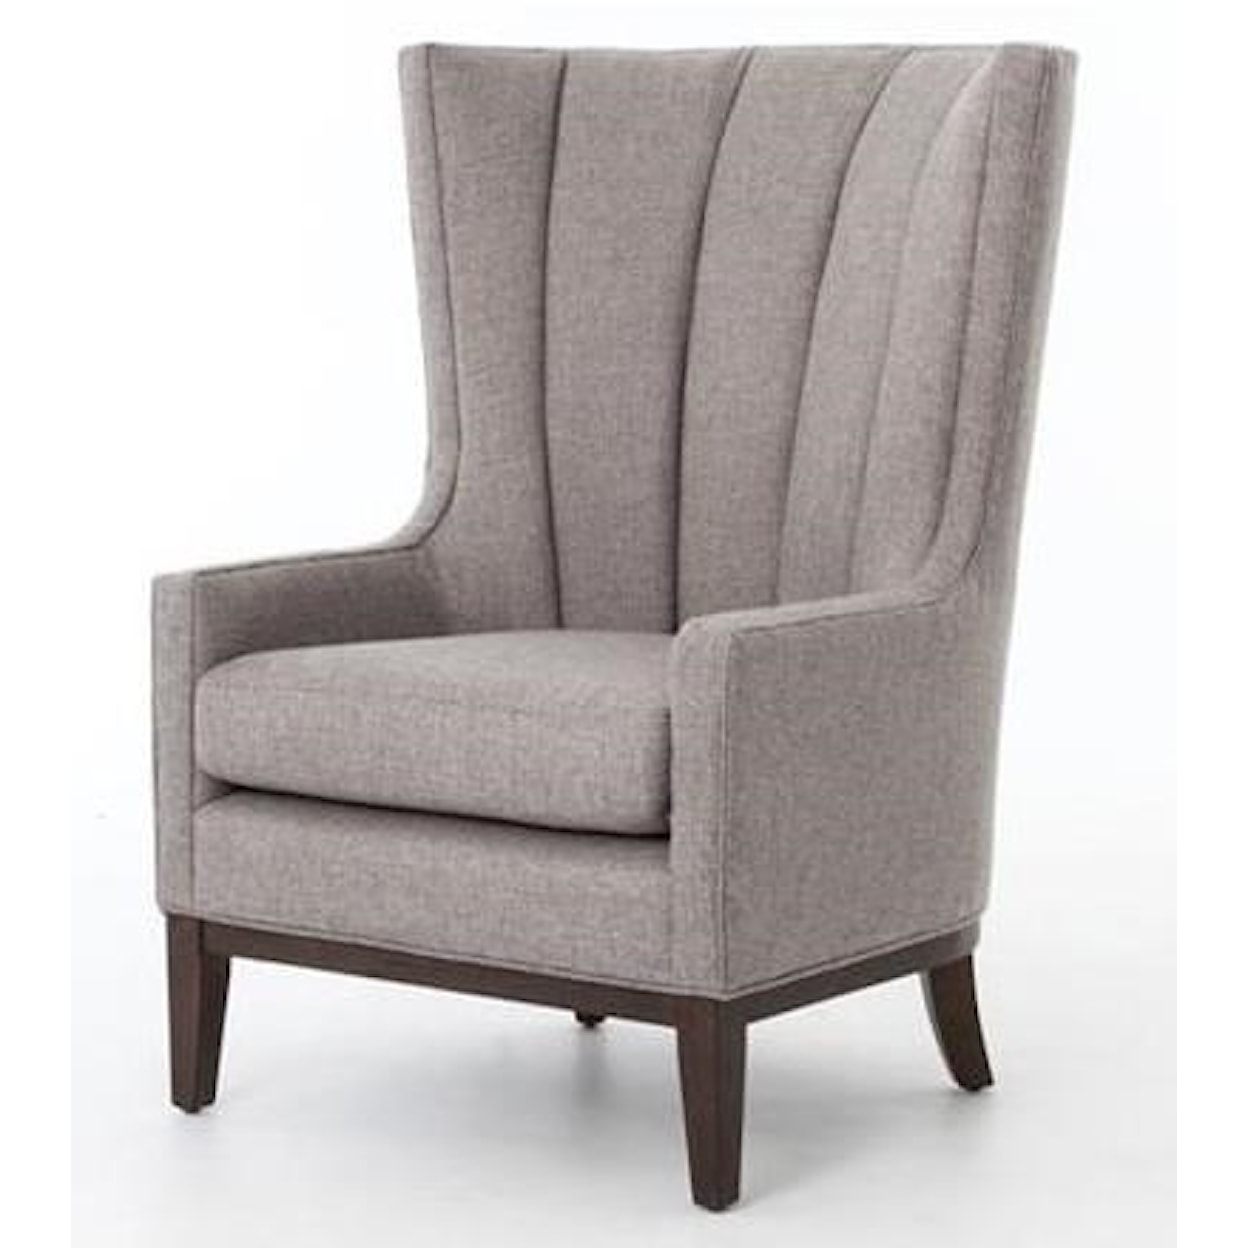 Four Hands Kensington CBBS Channeled Wing Chair